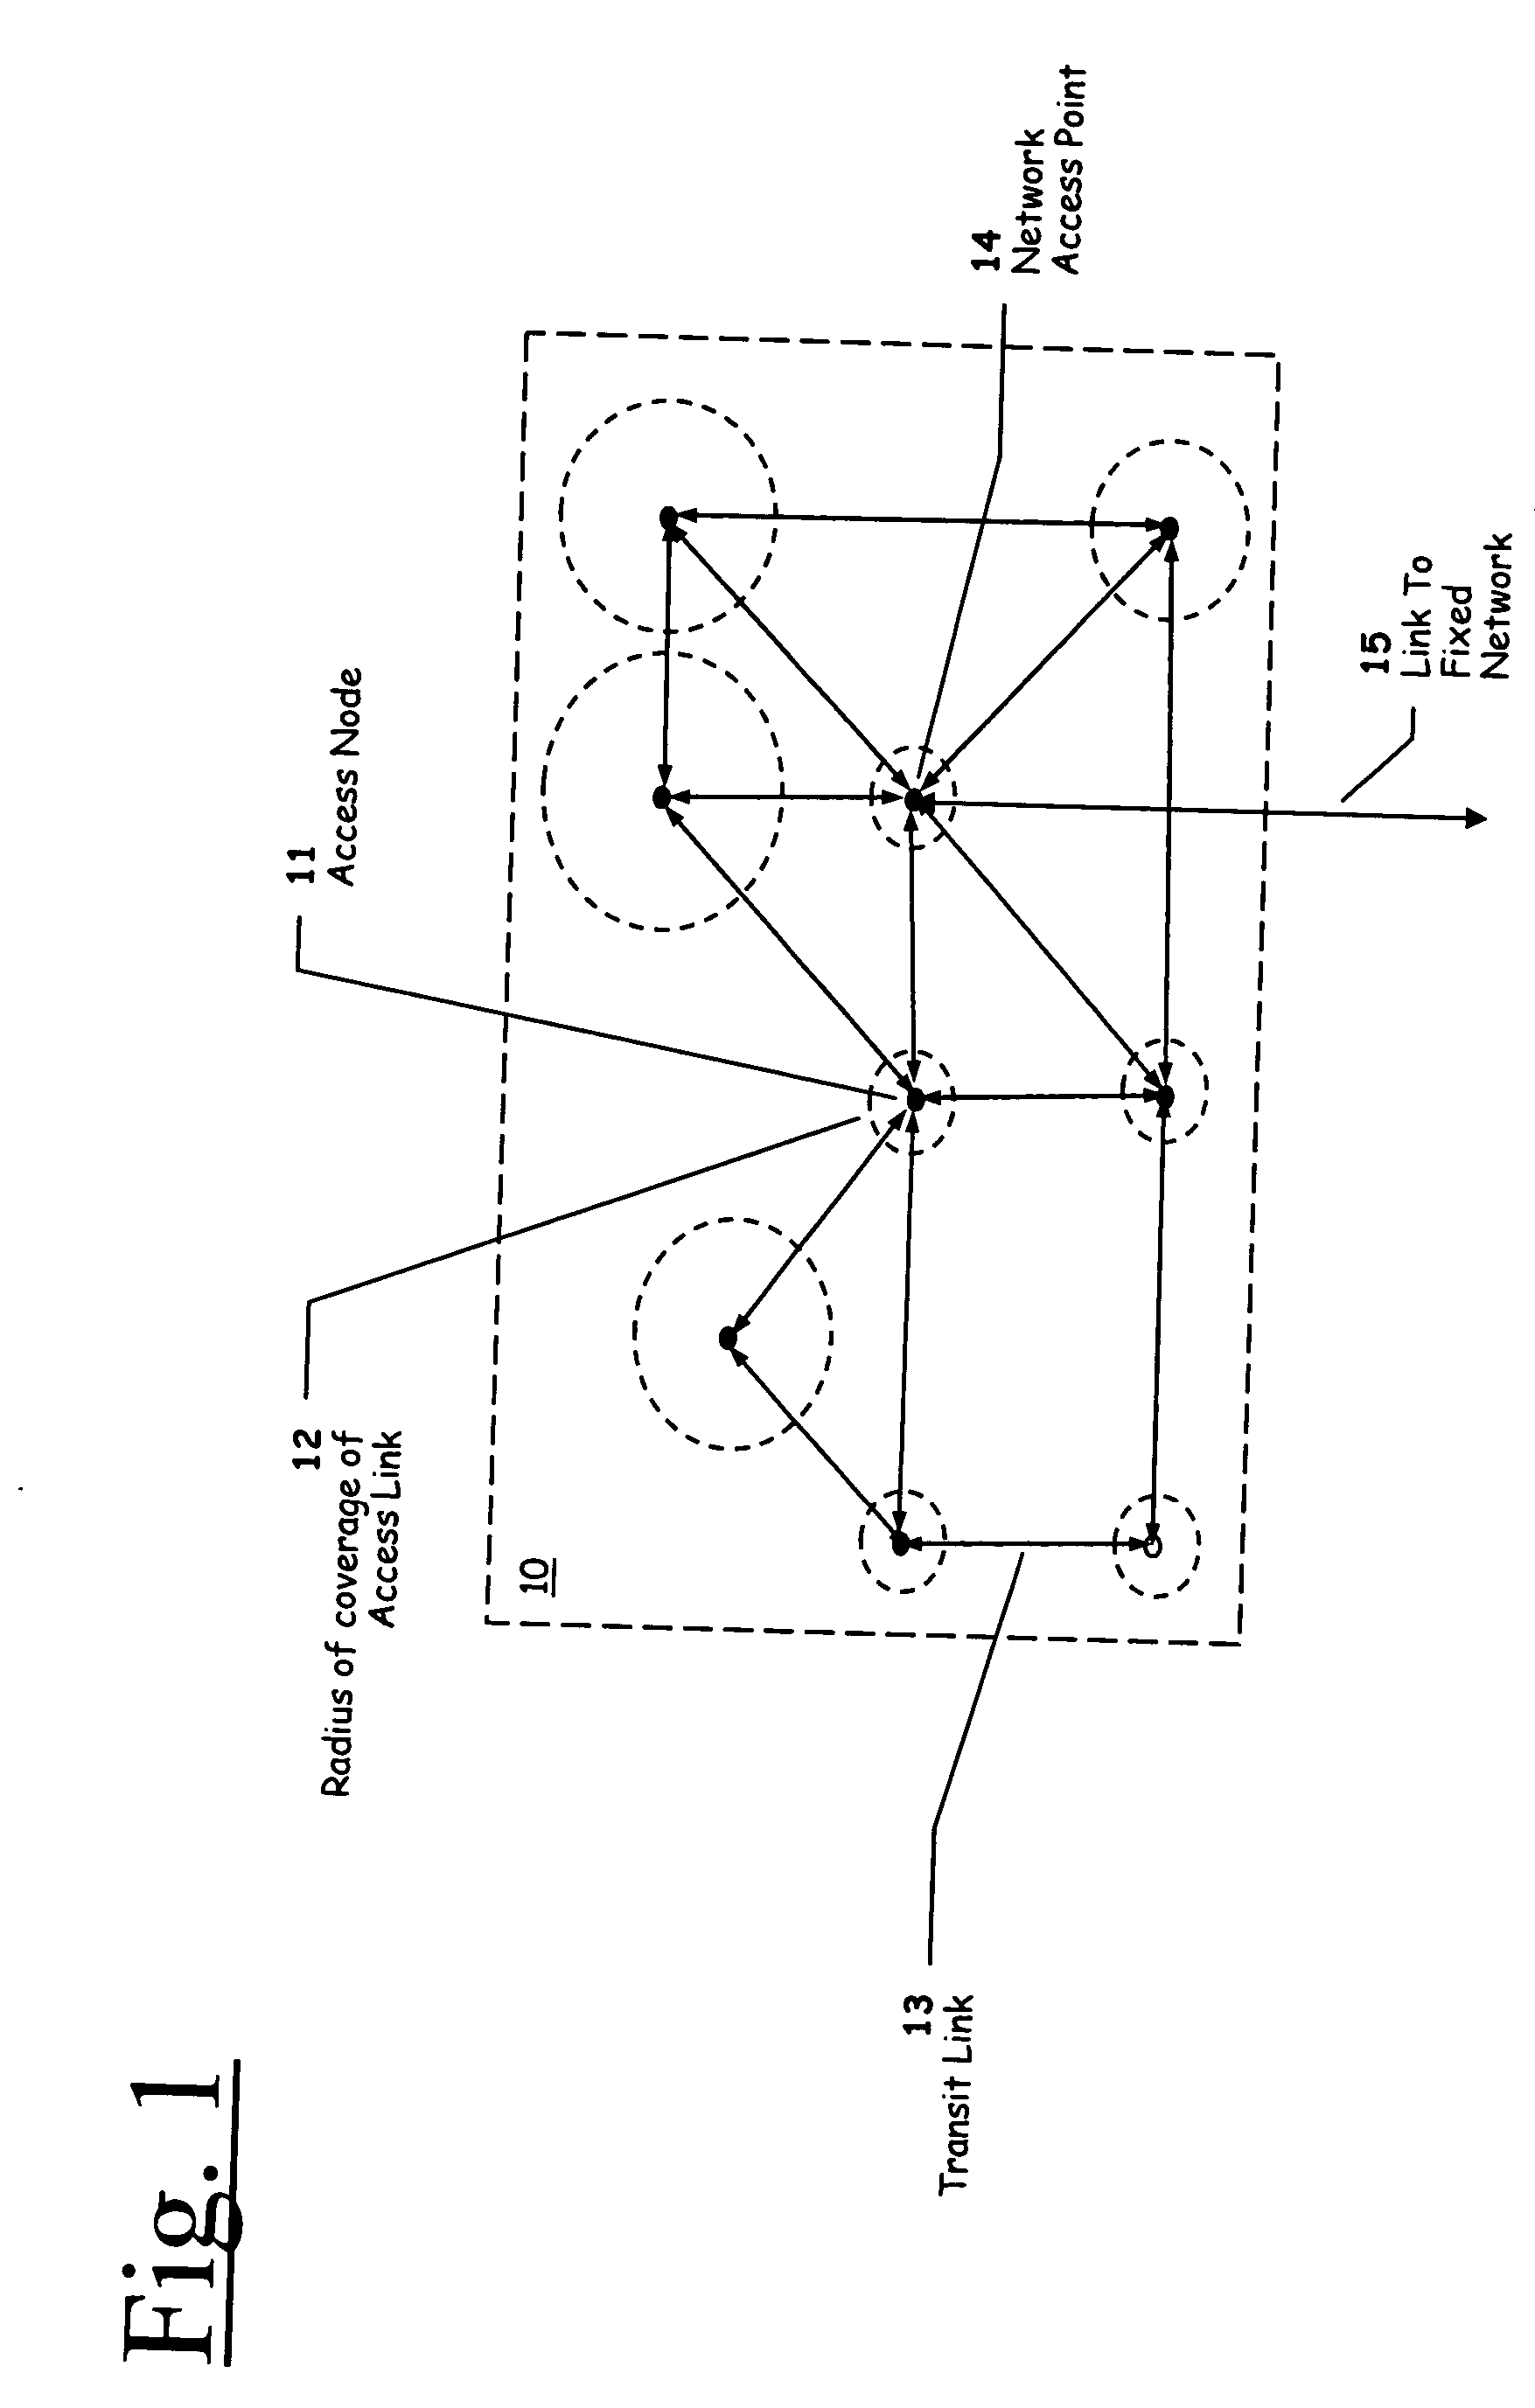 Wireless antennas, networks, methods, software, and services